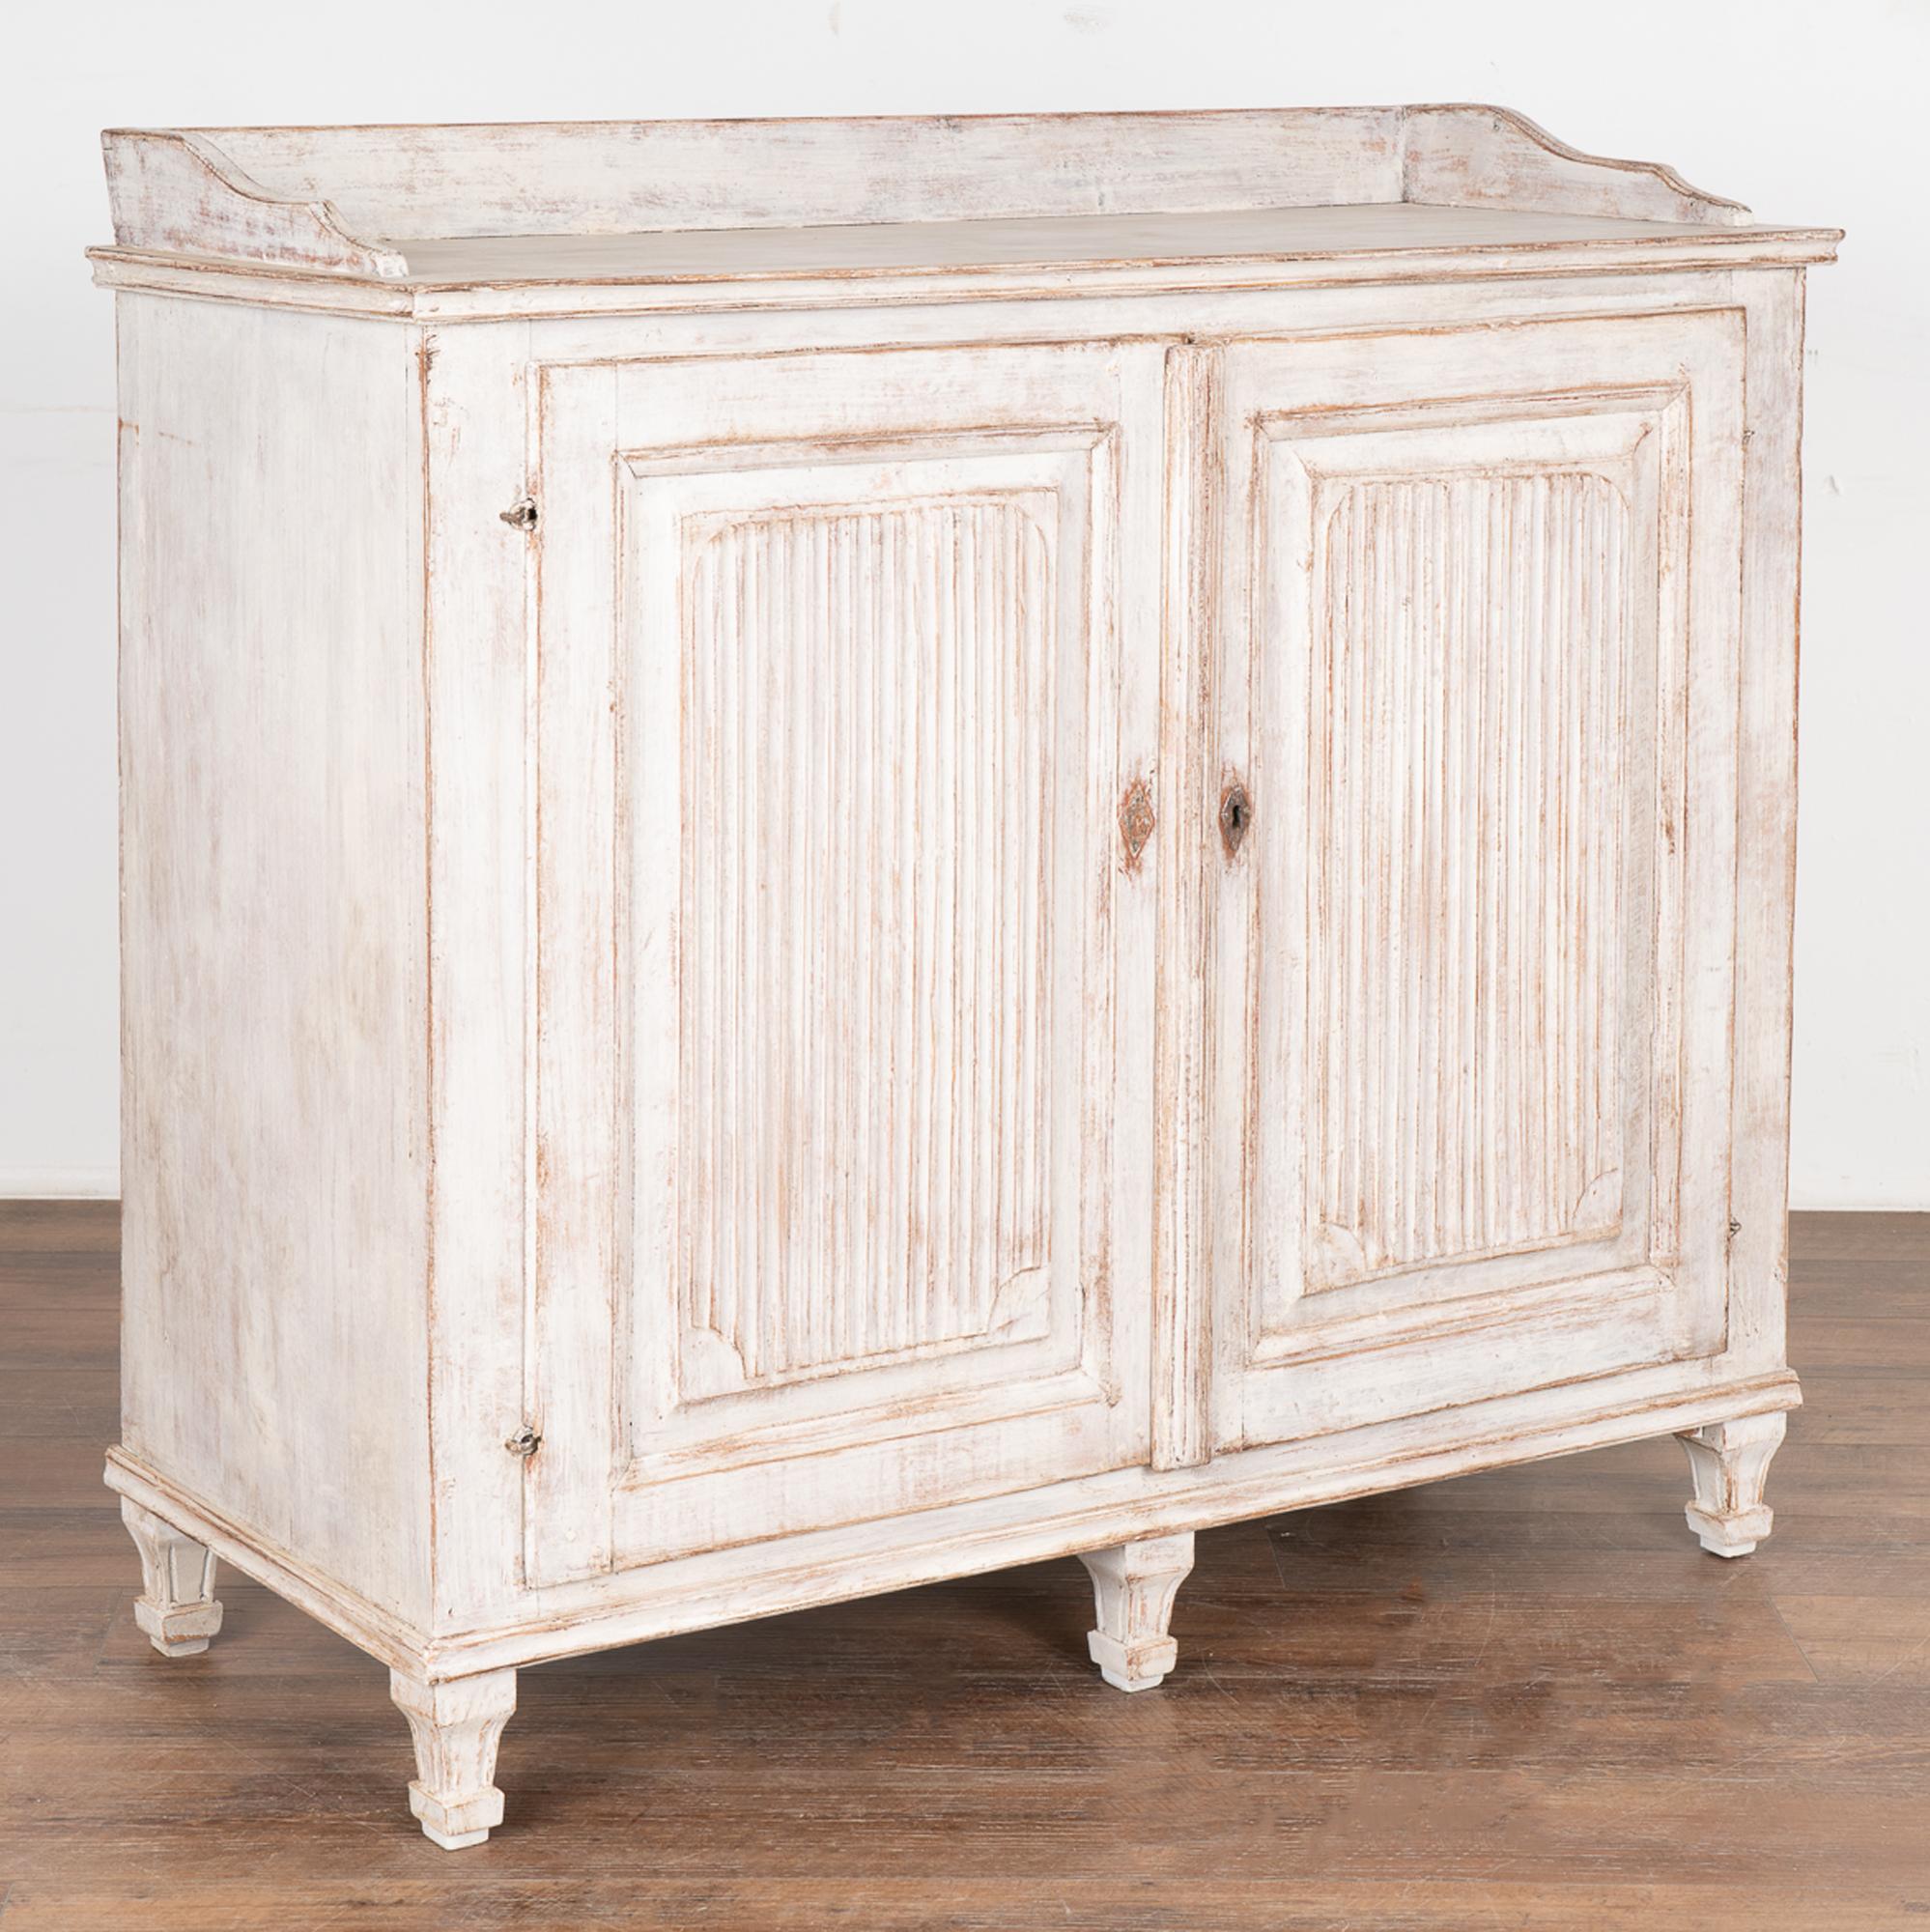 This lovely white Gustavian sideboard comes from the Swedish countryside. The simple fluted carving along the panel doors was a traditional element in Swedish furniture from this era.
The newer, professionally applied white painted finish has been